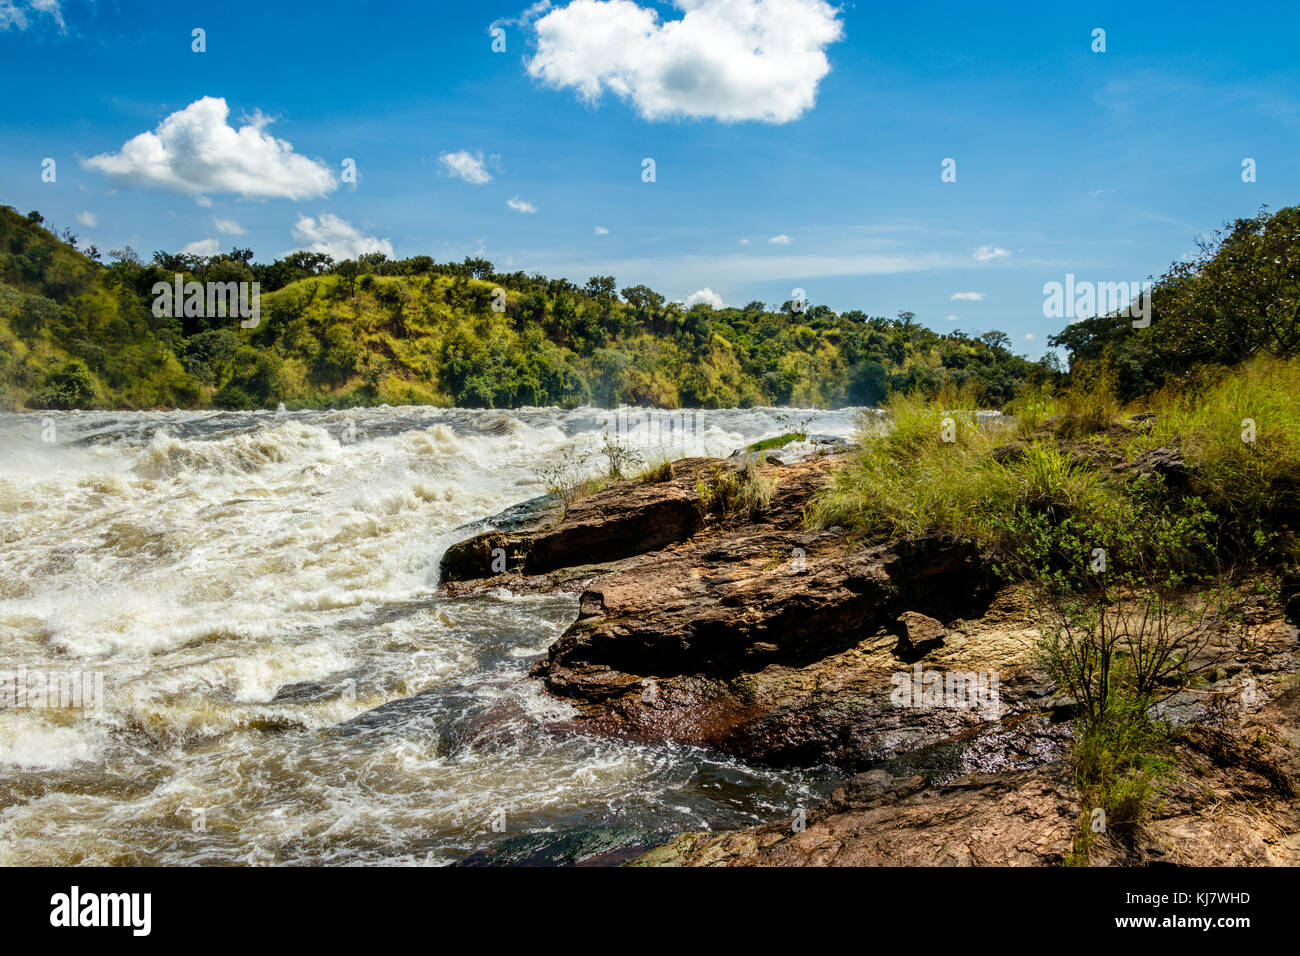 The power of the Murchison Falls, also known as Kabalega Falls, is a waterfall between Lake Kyoga and Lake Albert on the White Nile River in Uganda. Stock Photo